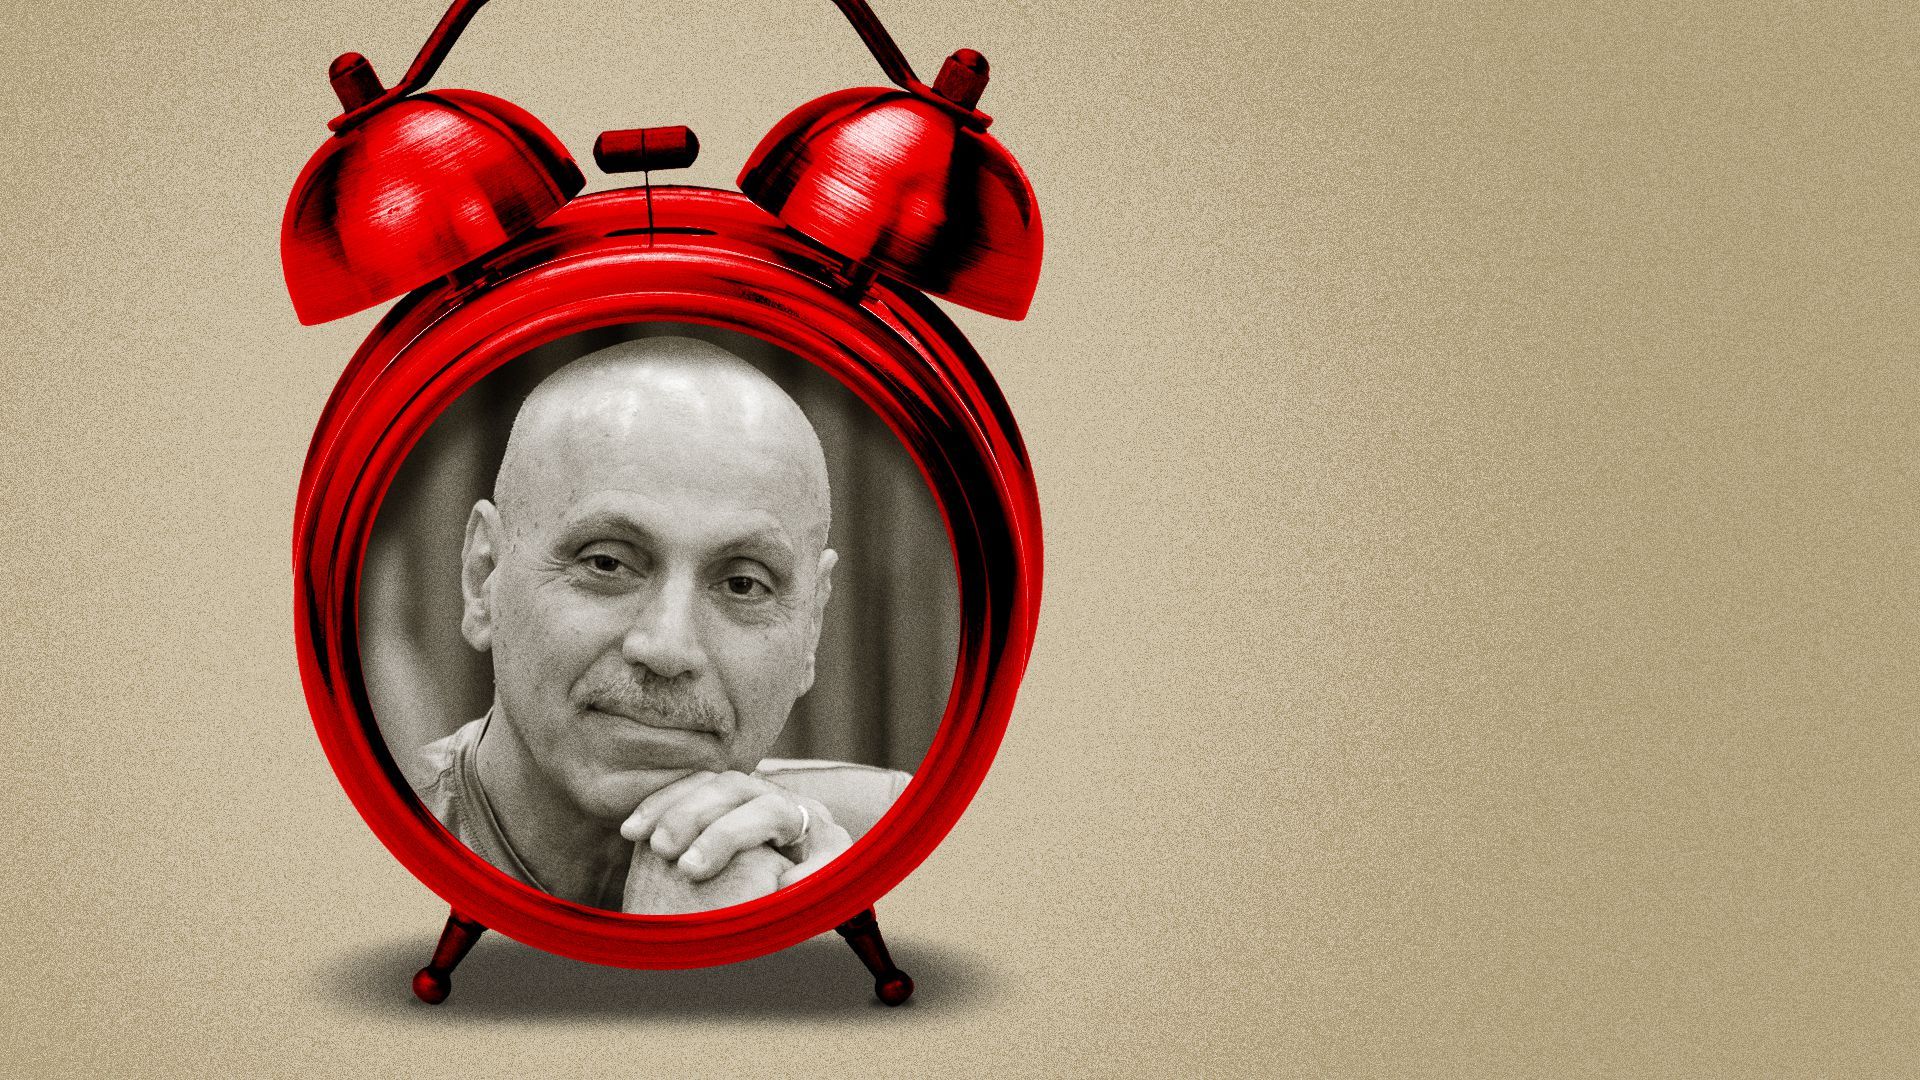 Photo illustration collage of Andy Shallal inside a red alarm clock.